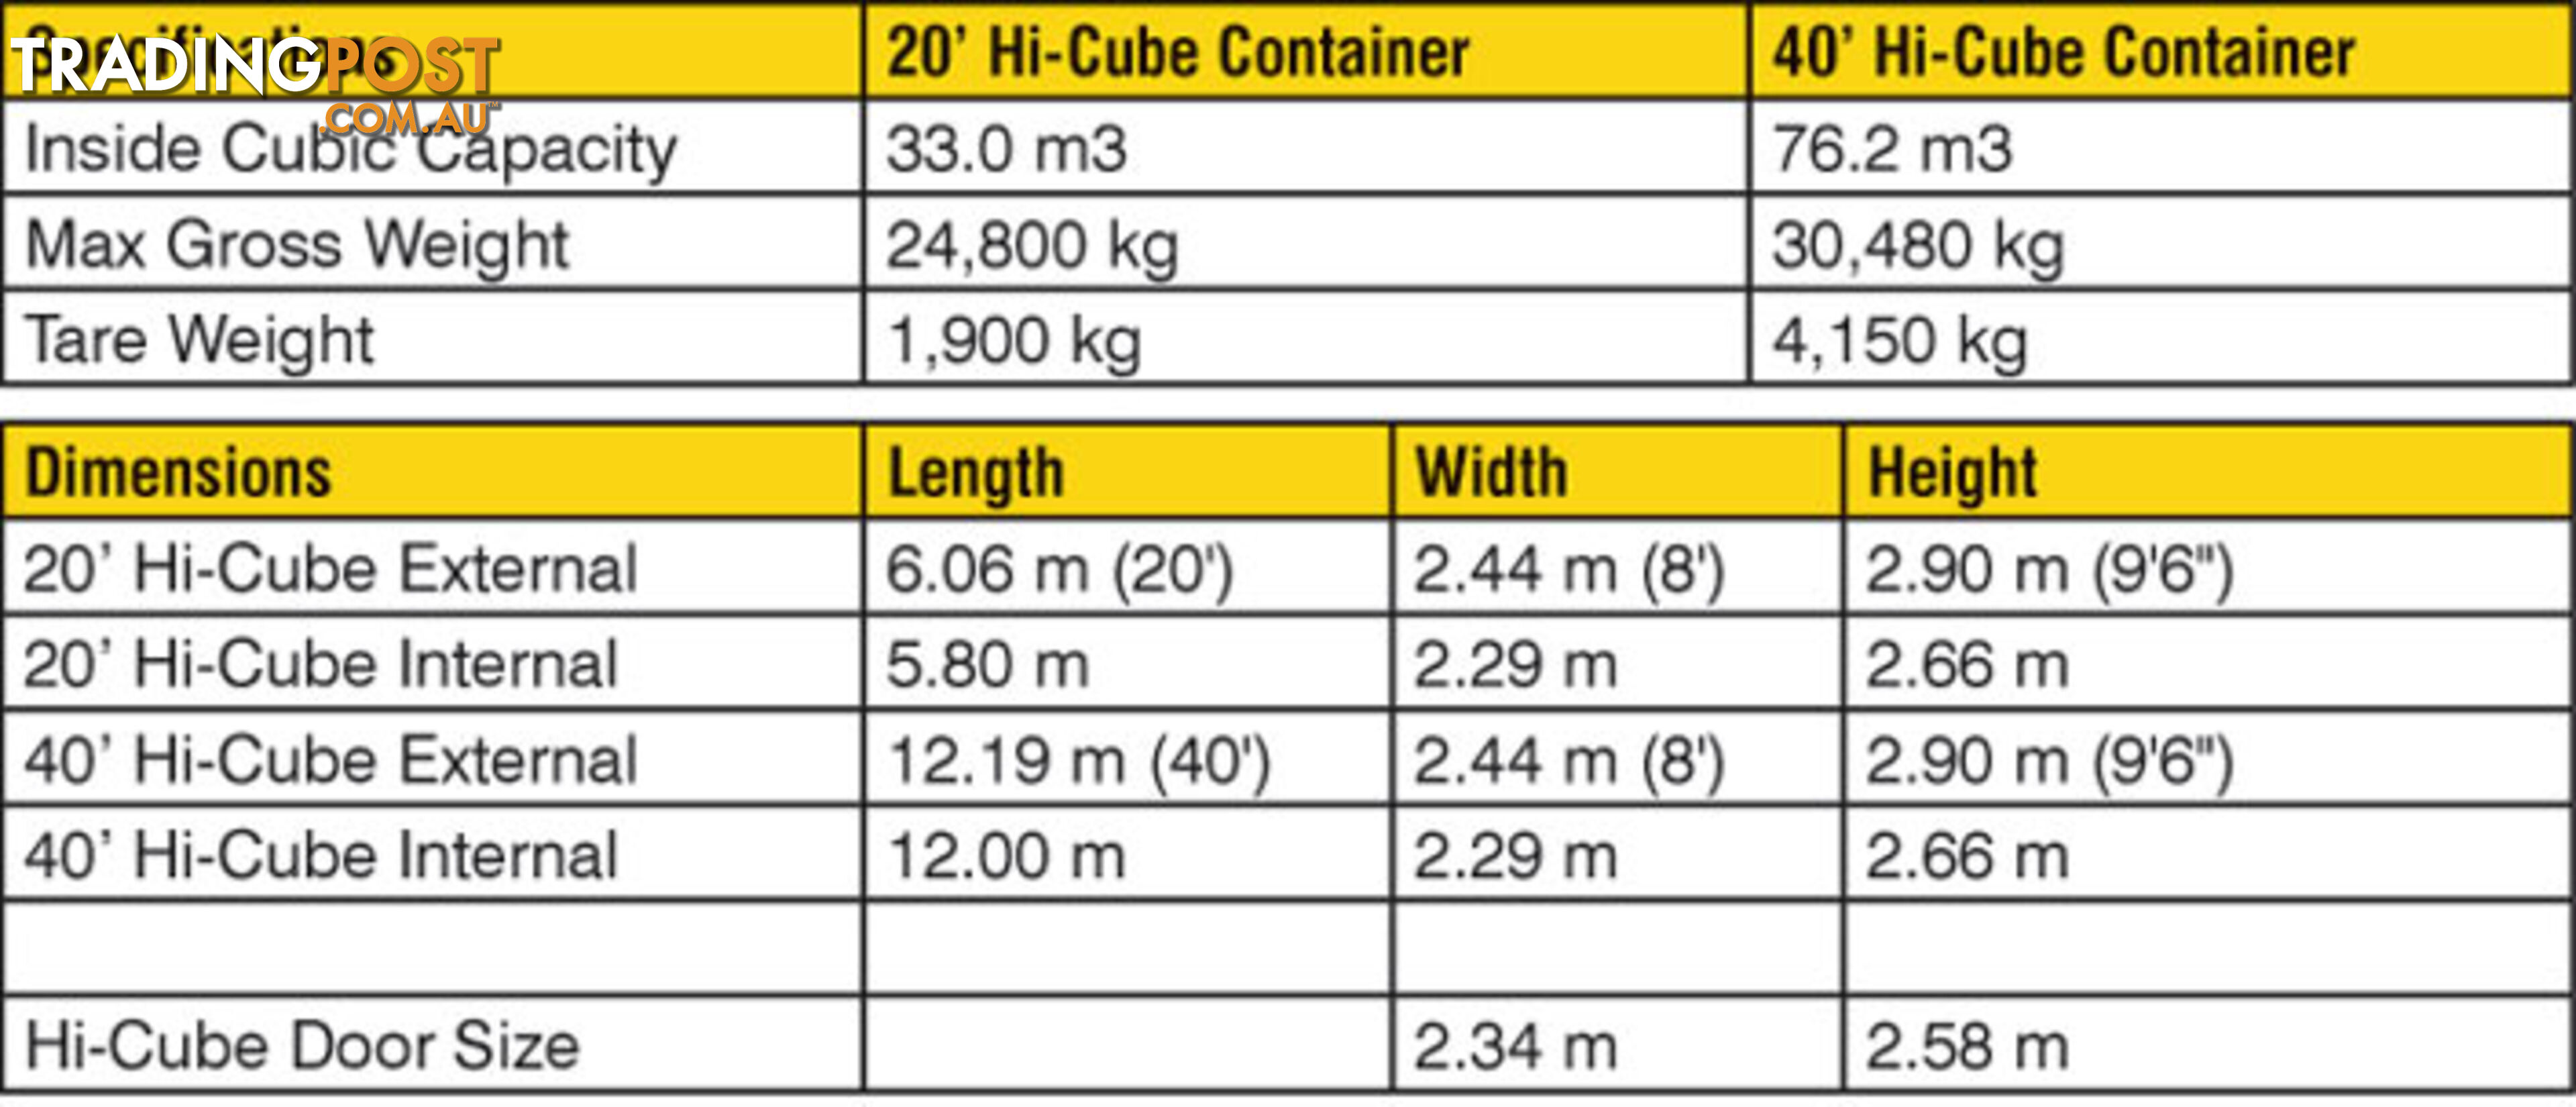 New 40ft High Cube Shipping Containers Cooya - From $7900 + GST